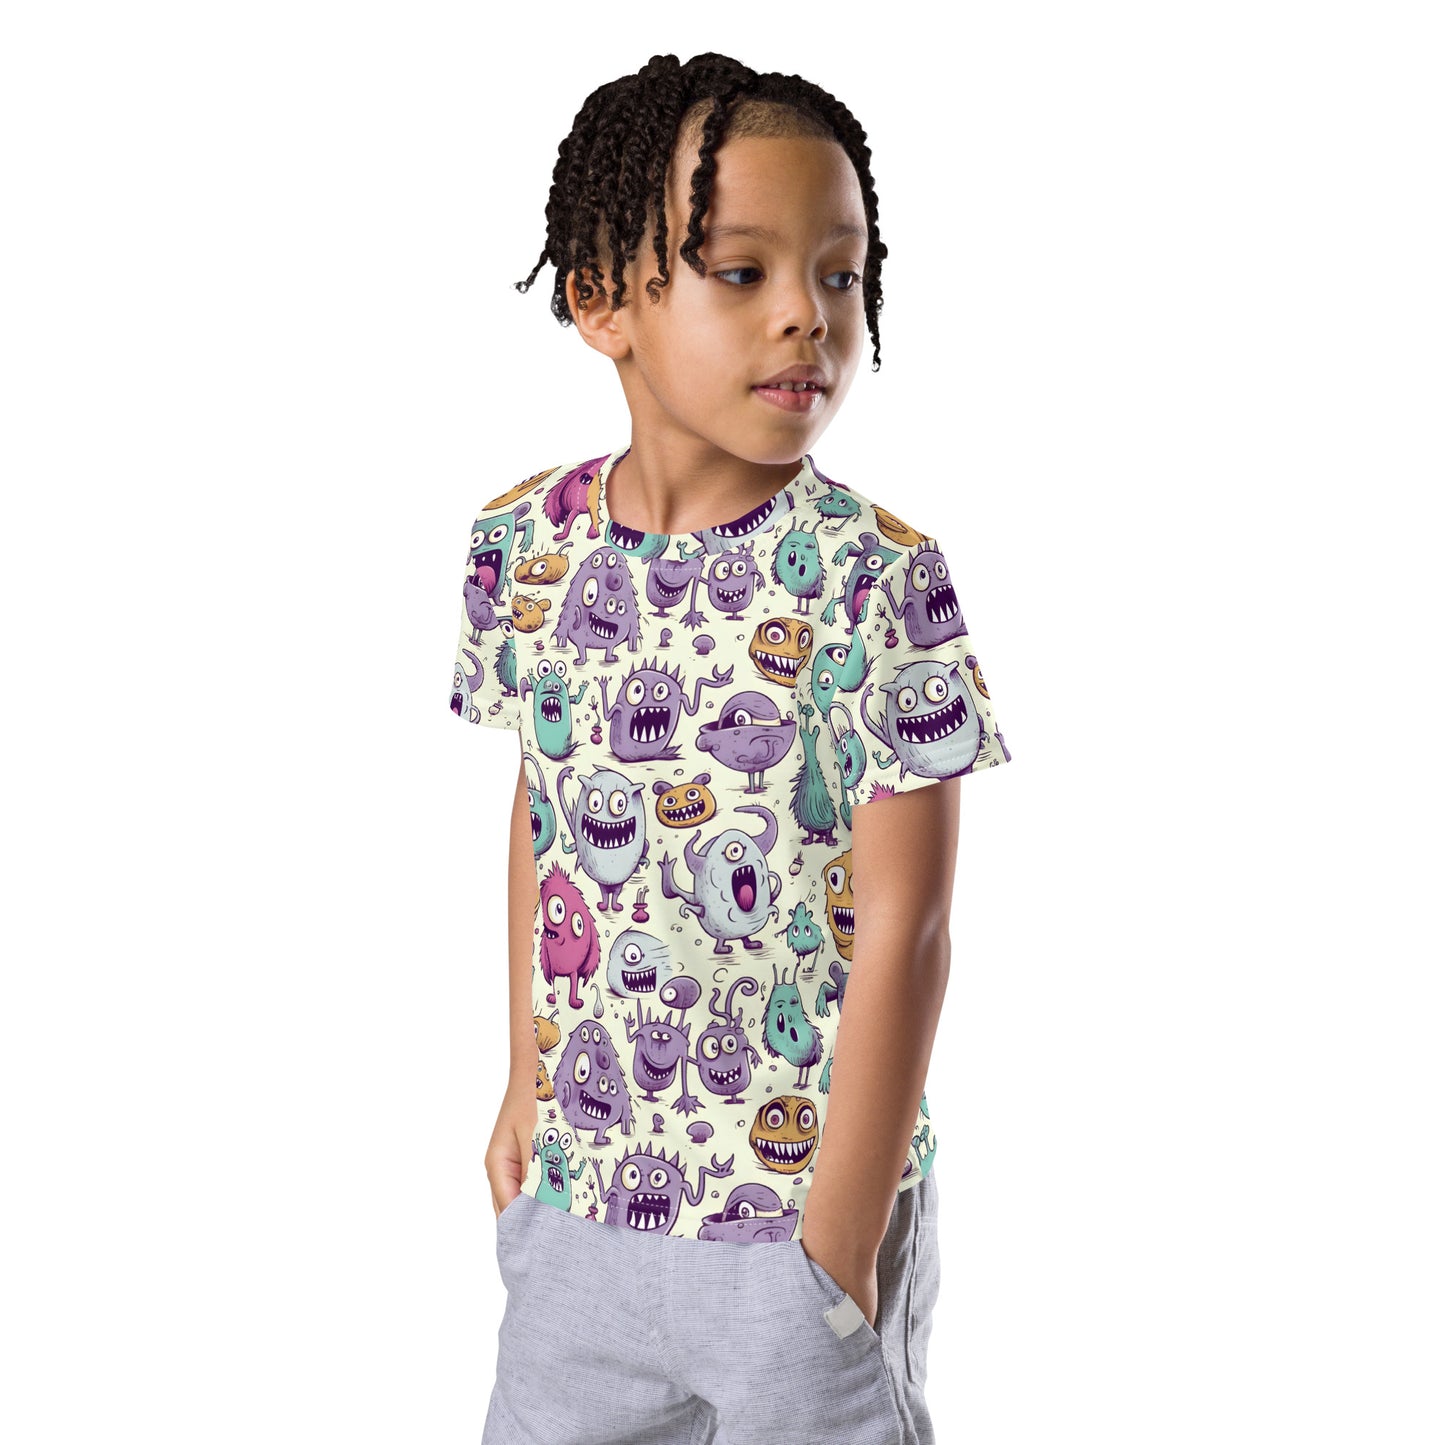 T-Shirt "Funny Creatures" for Kids